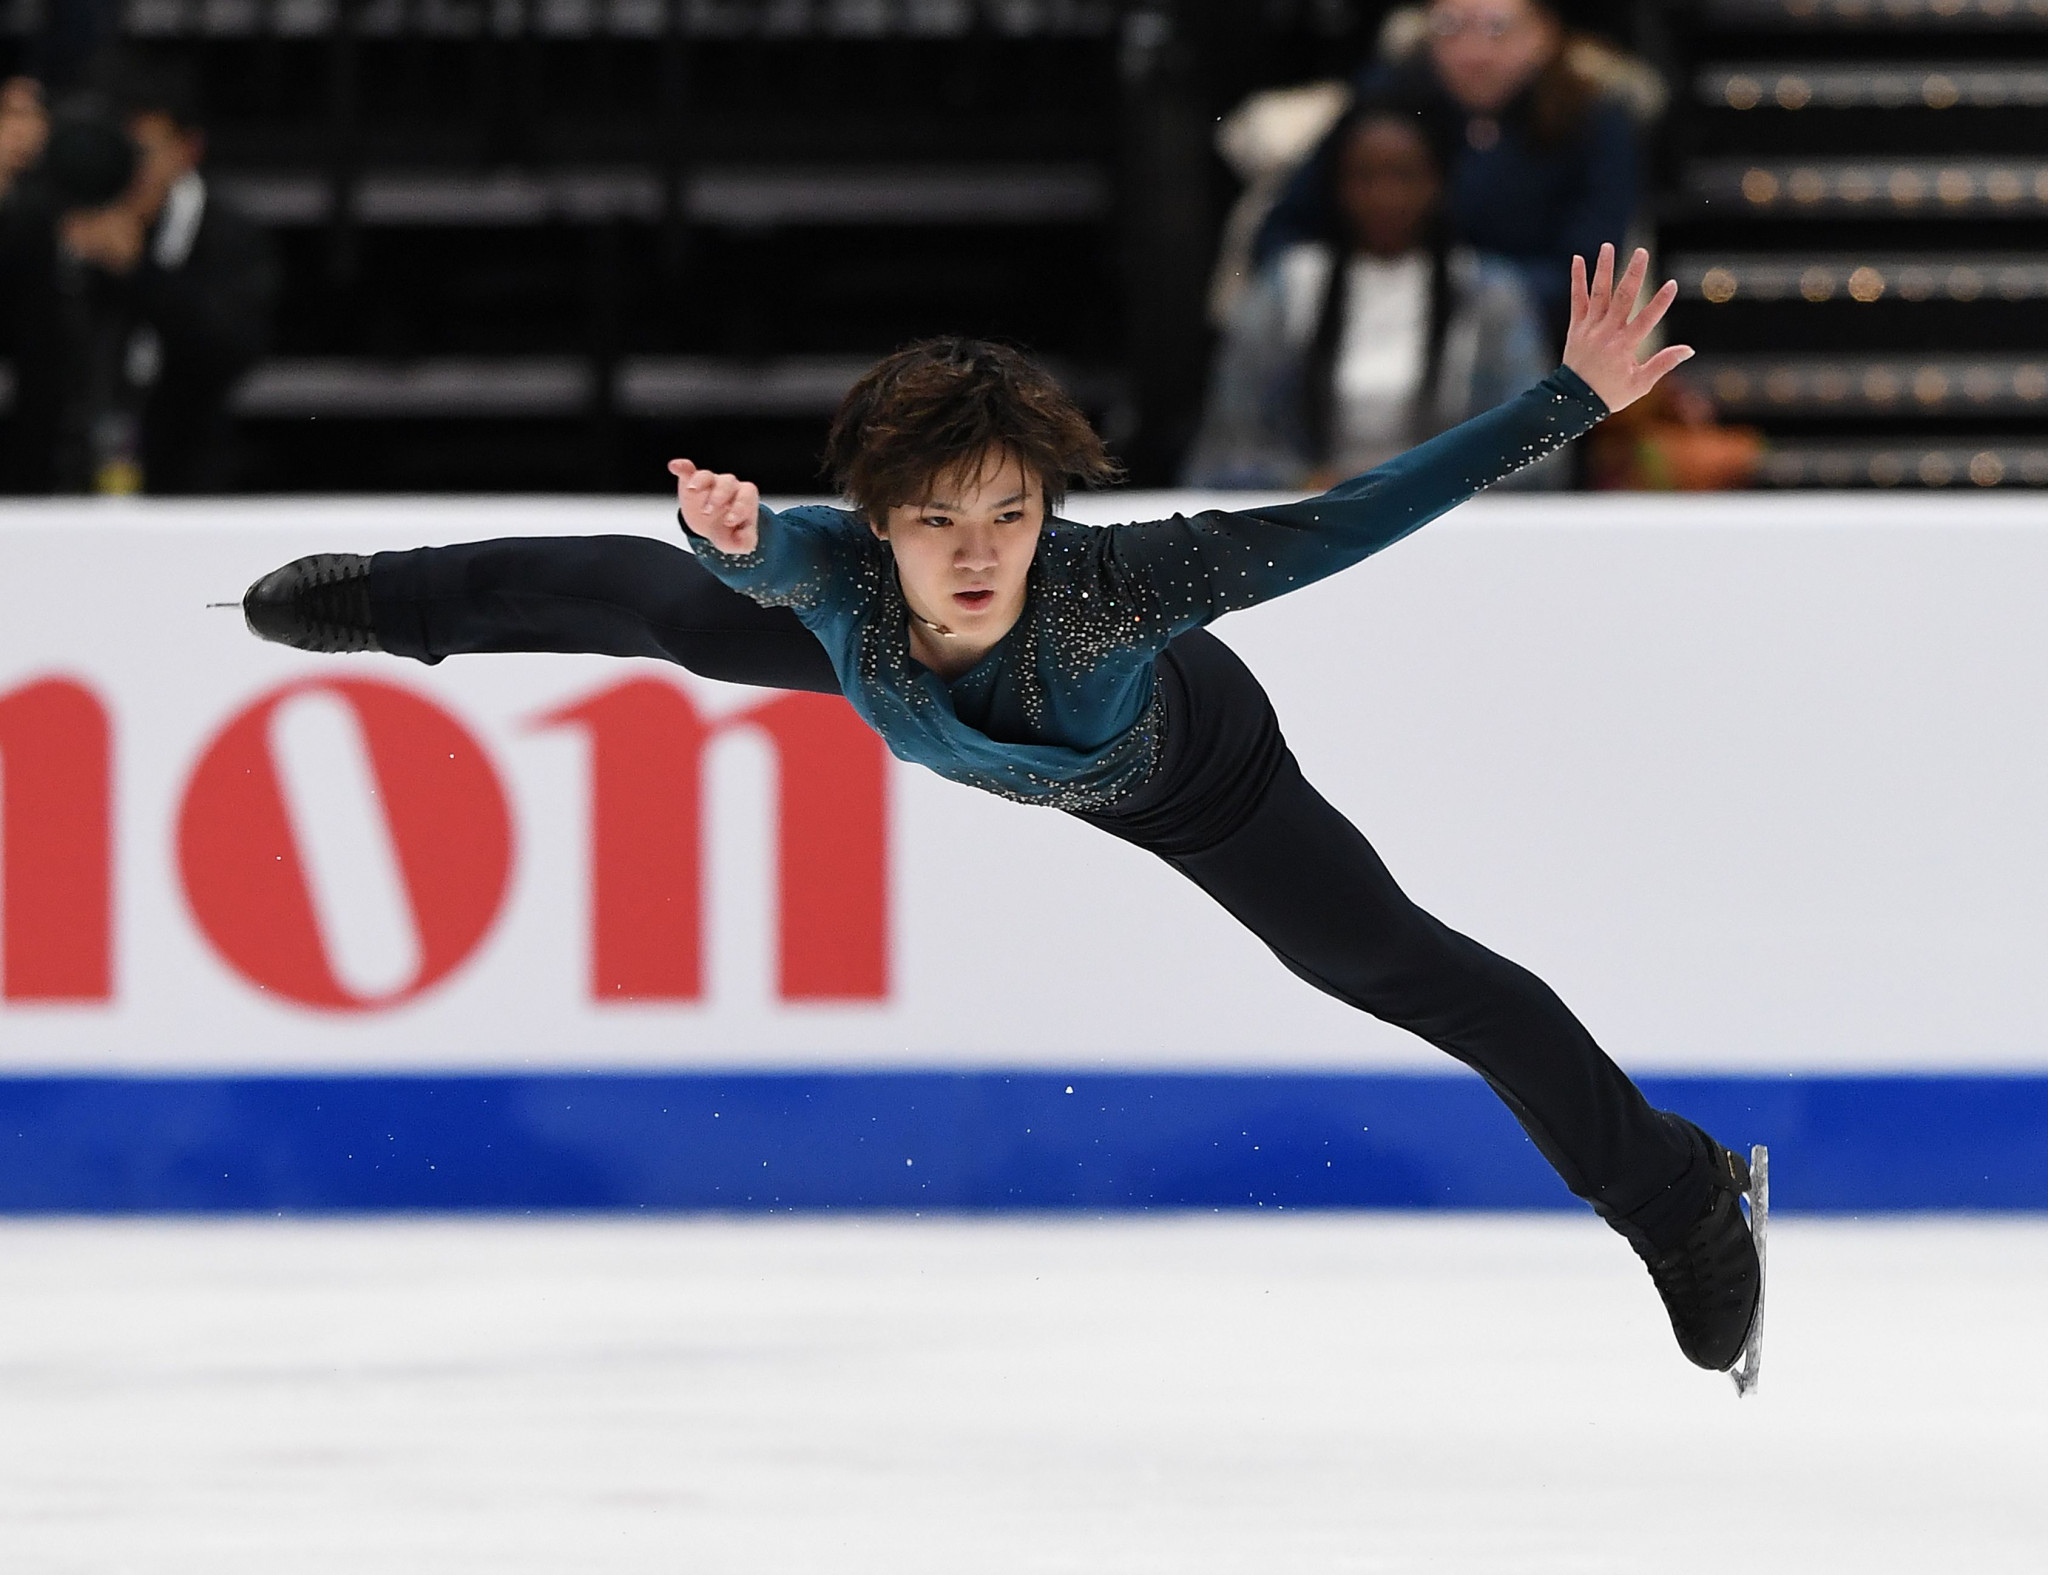 Shoma Uno won the men's competition at the Four Continents Figure Skating Championships in Anaheim ©Getty Images